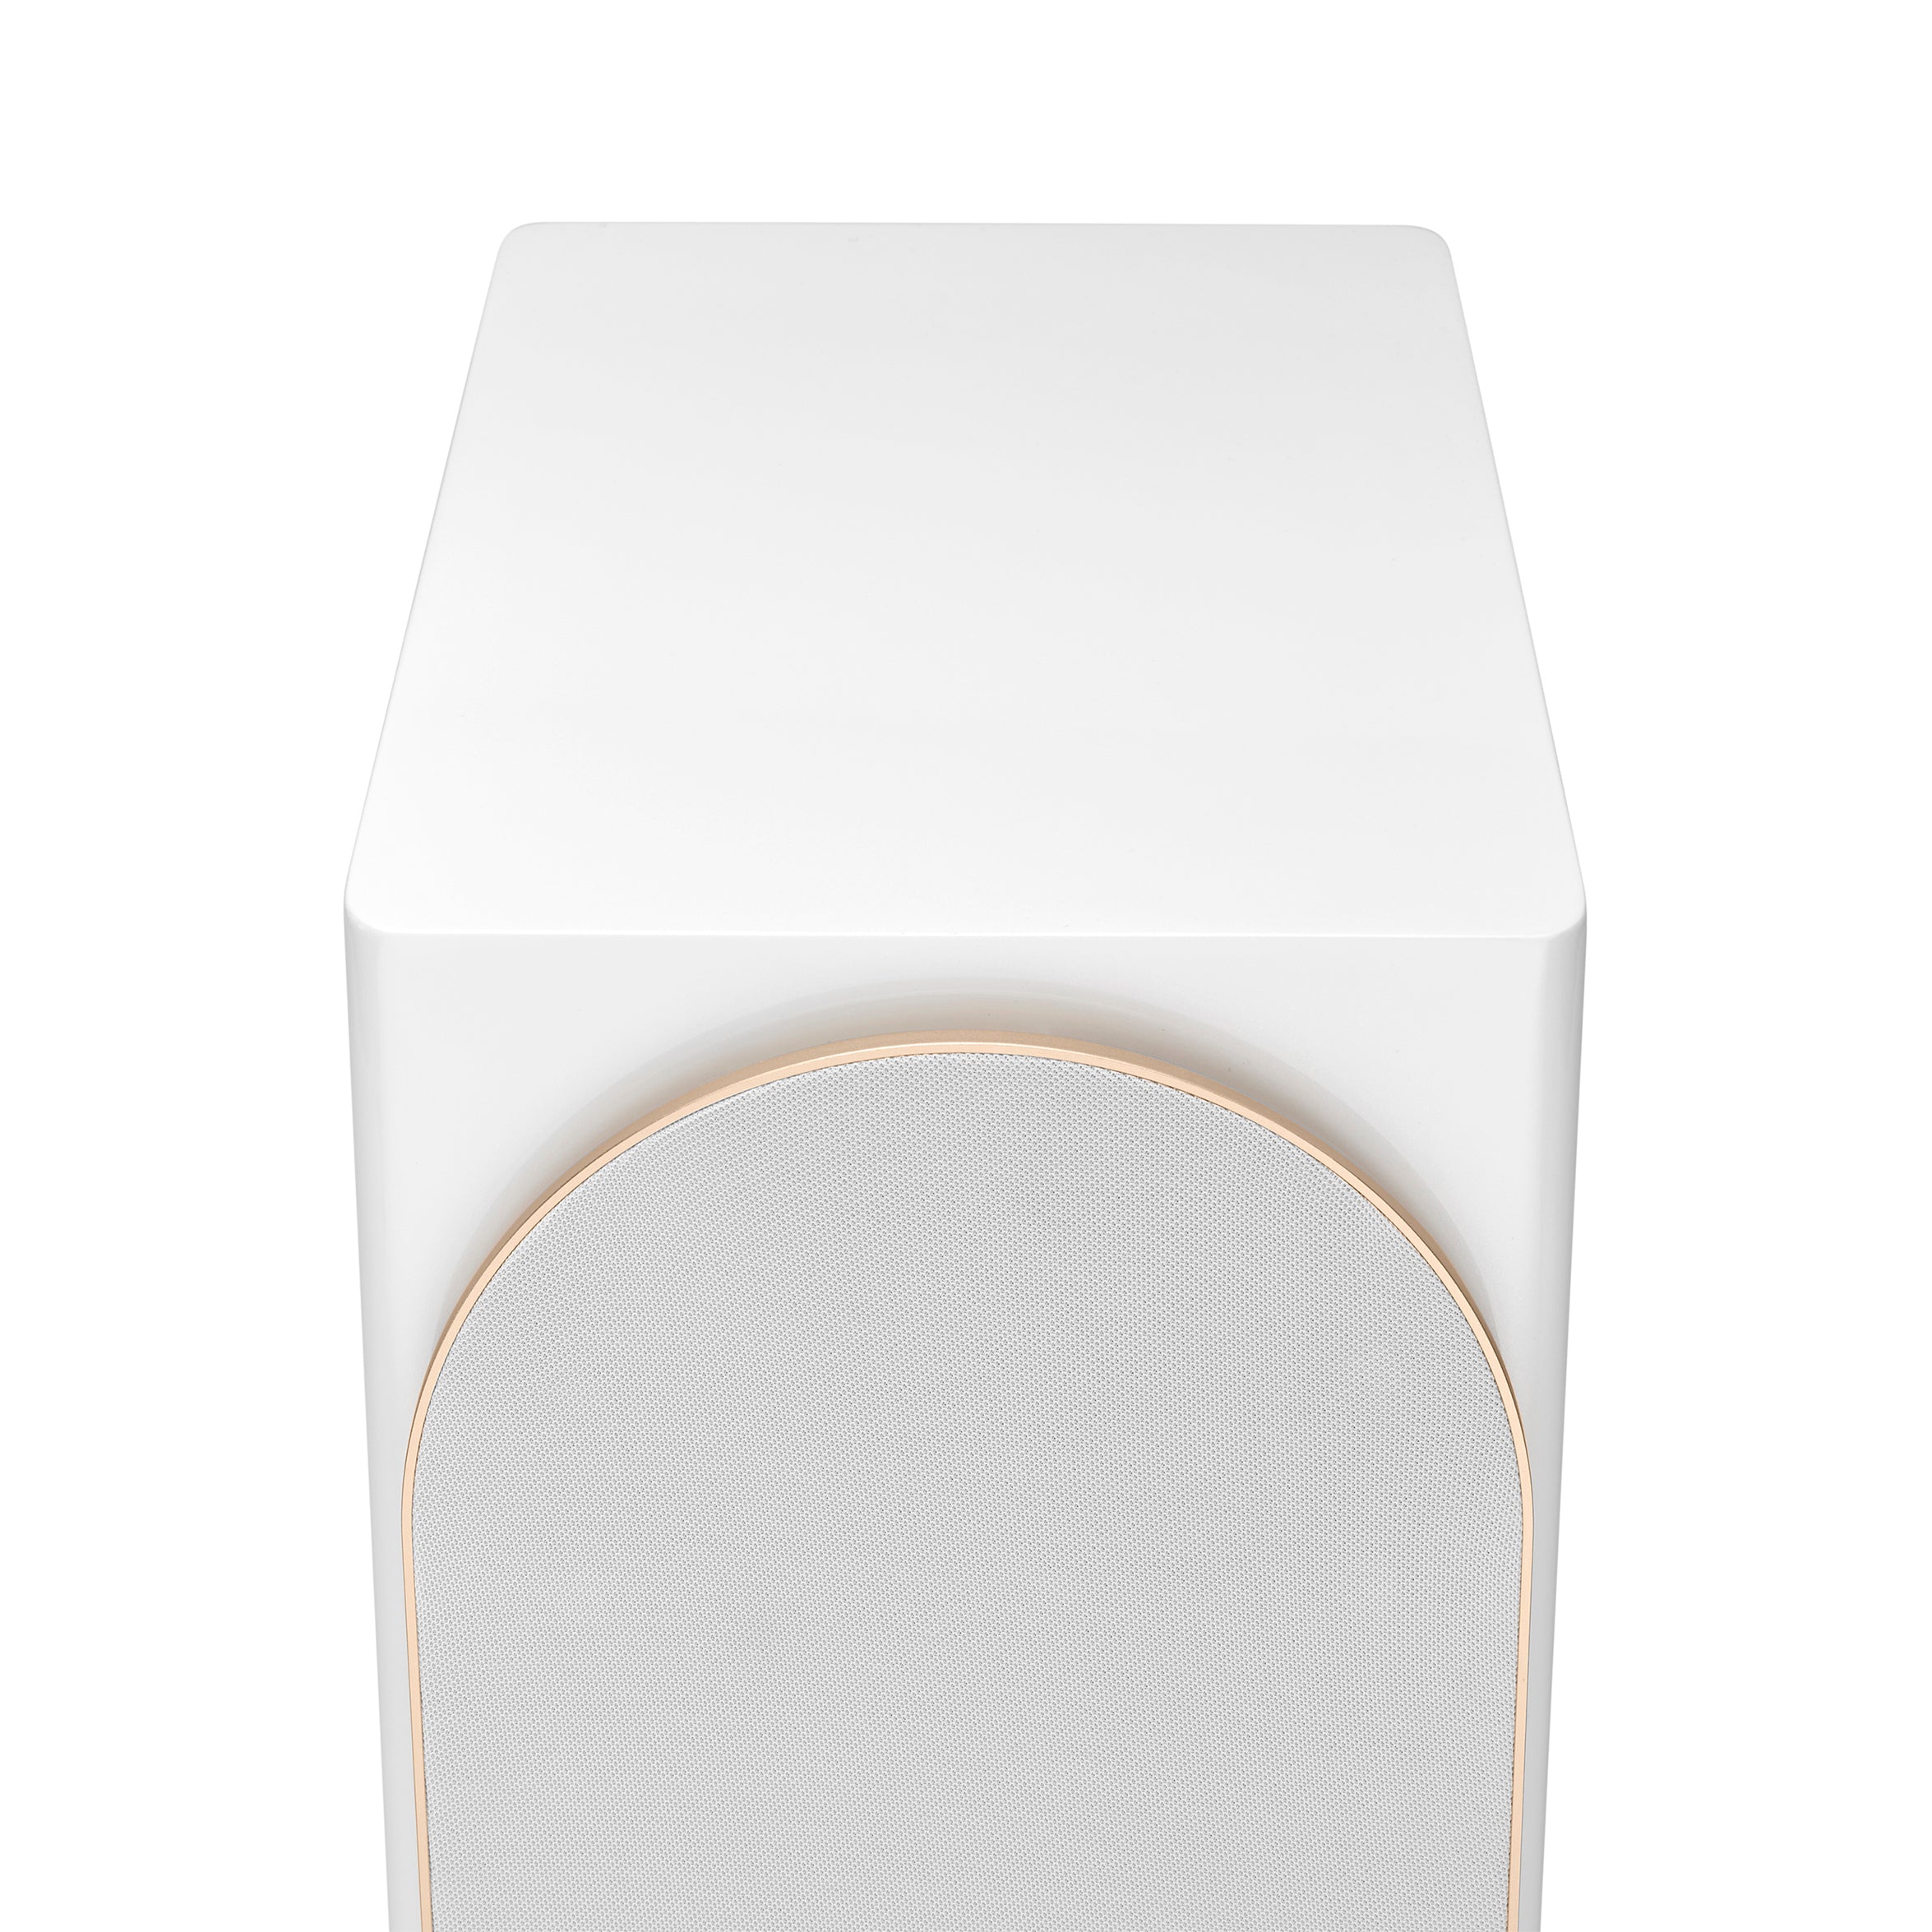 triangle-capella-enceinte-active-wifi-bluetooth-haut-de-gamme-stereo-hub-wisa-streaming-musique-pictures-packshot-blanc-sideral-space-white-details